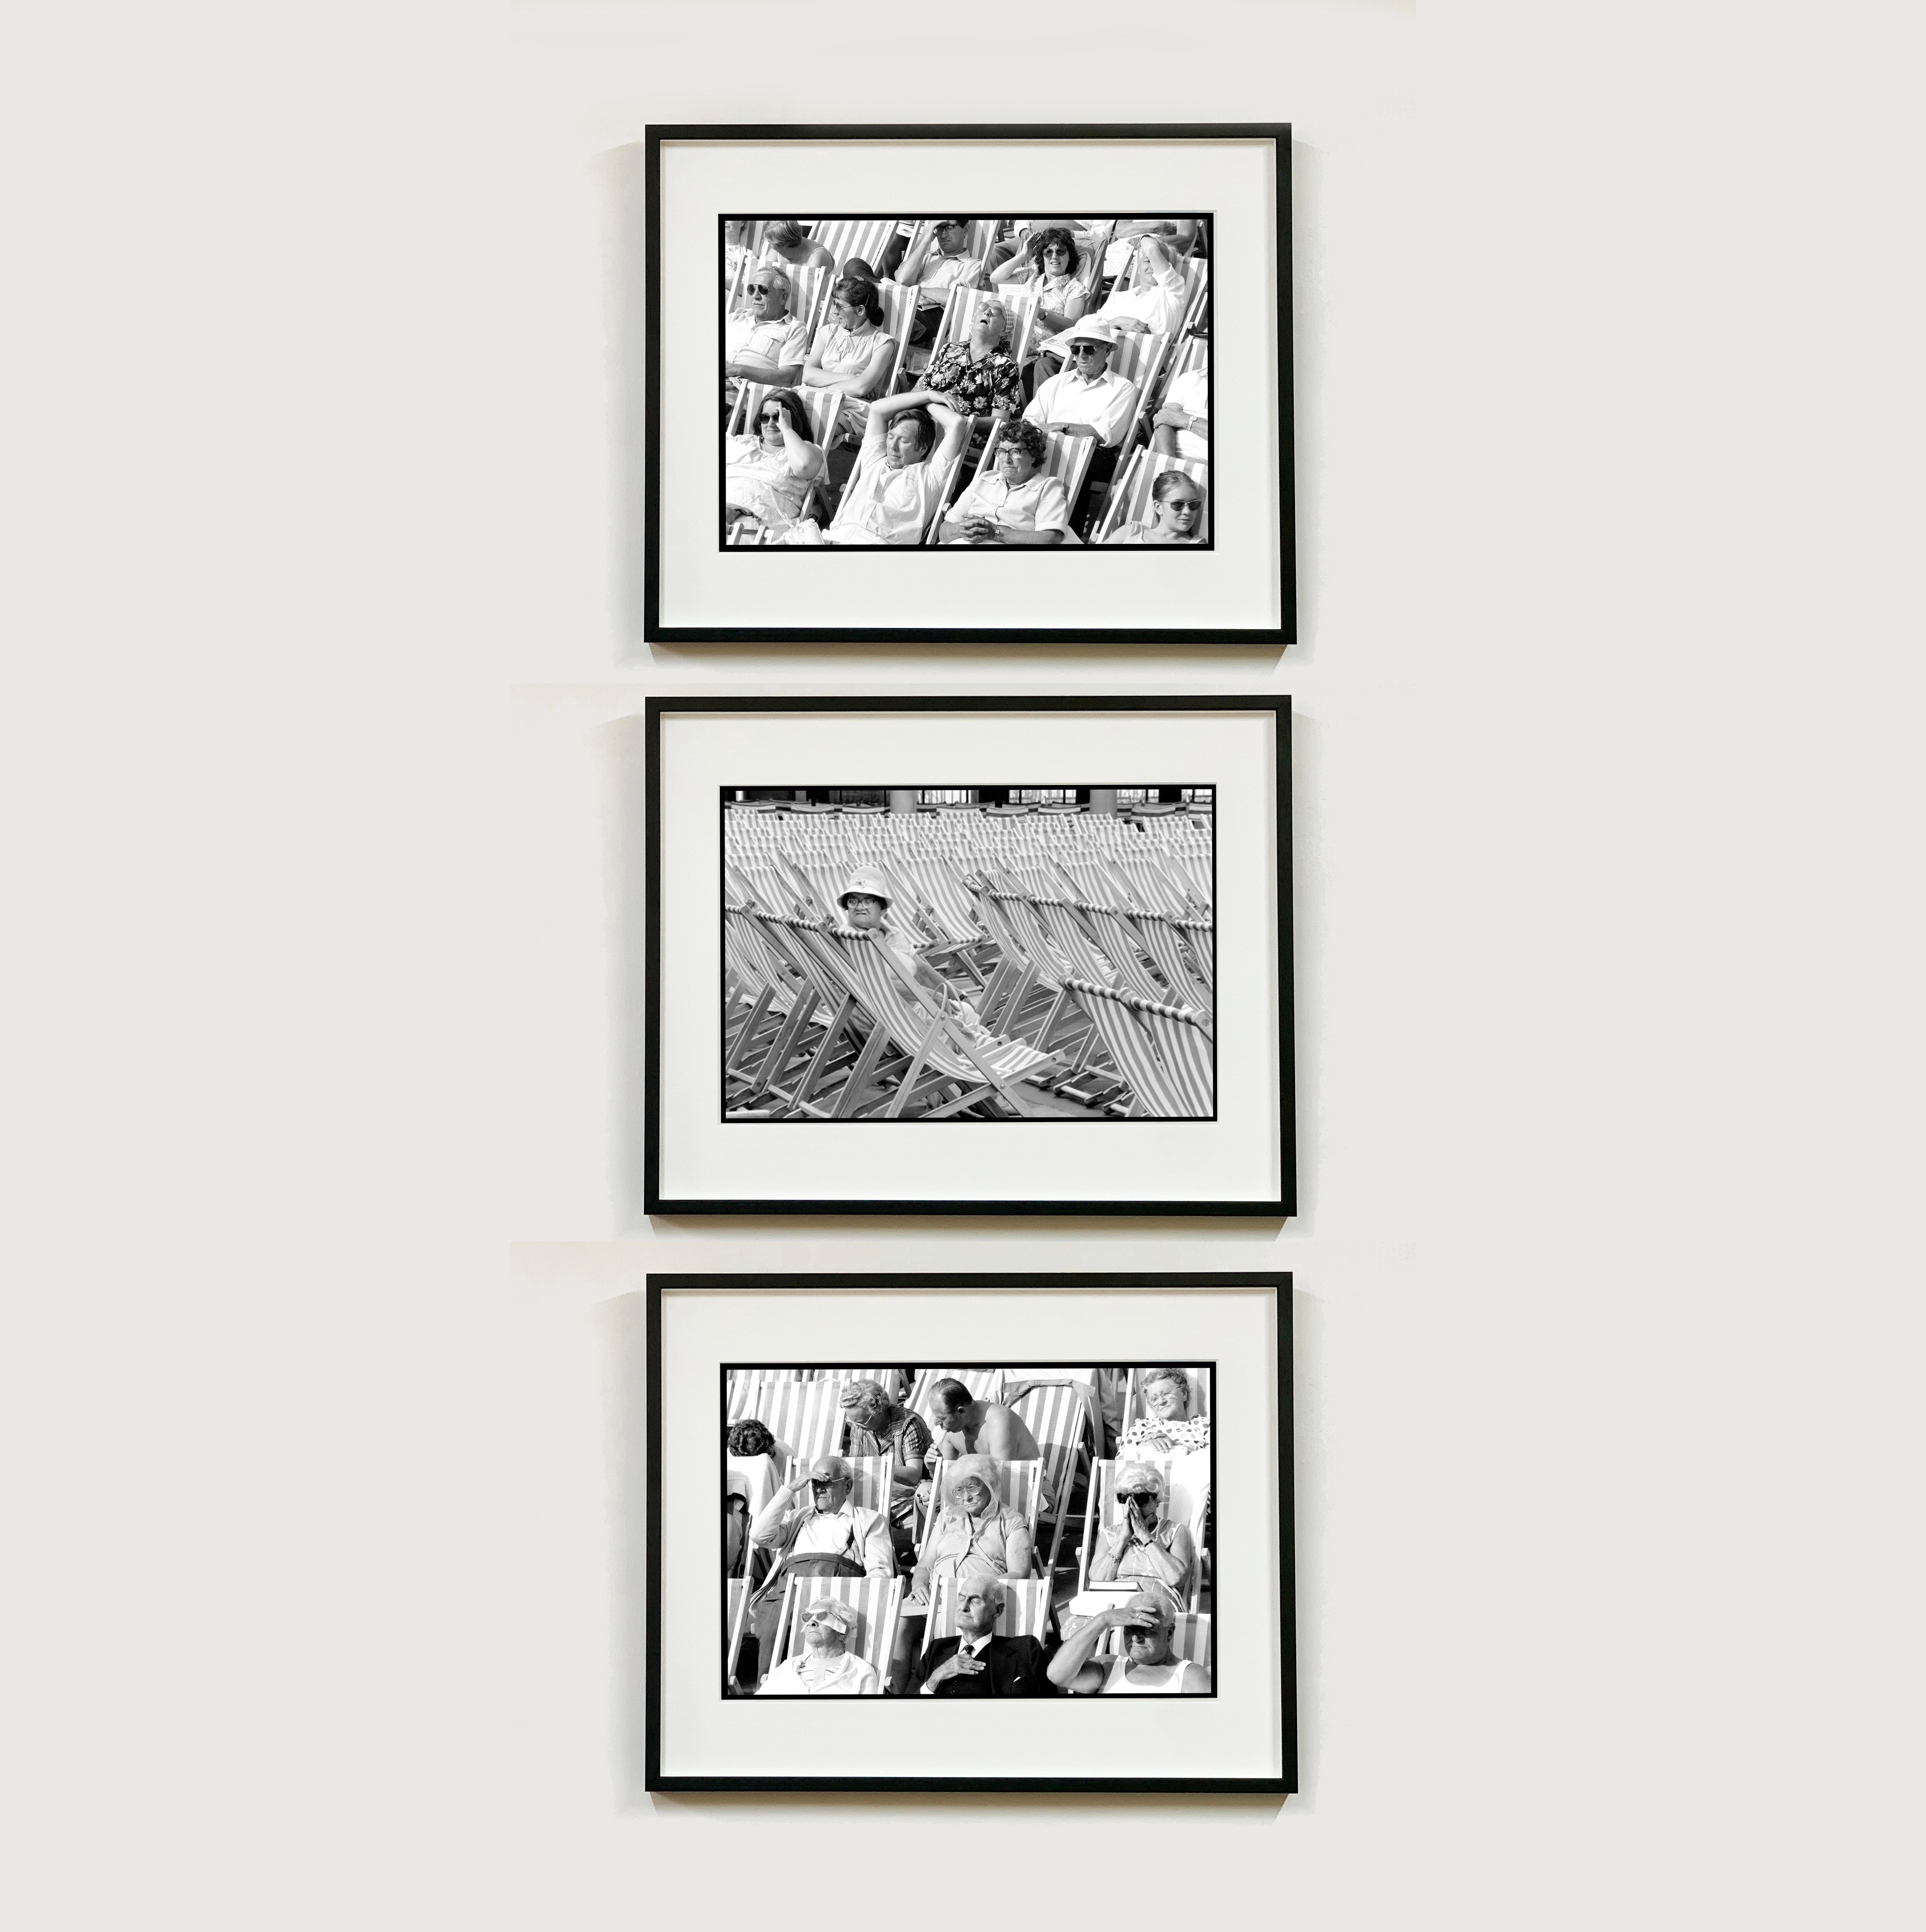 'Bandstand', set of three framed artworks, captured on a visit to his grandparents at the British seaside in Eastbourne, this collection by Samuel Field is a beautiful reminder of days gone by.

This listing is for three artworks each measuring